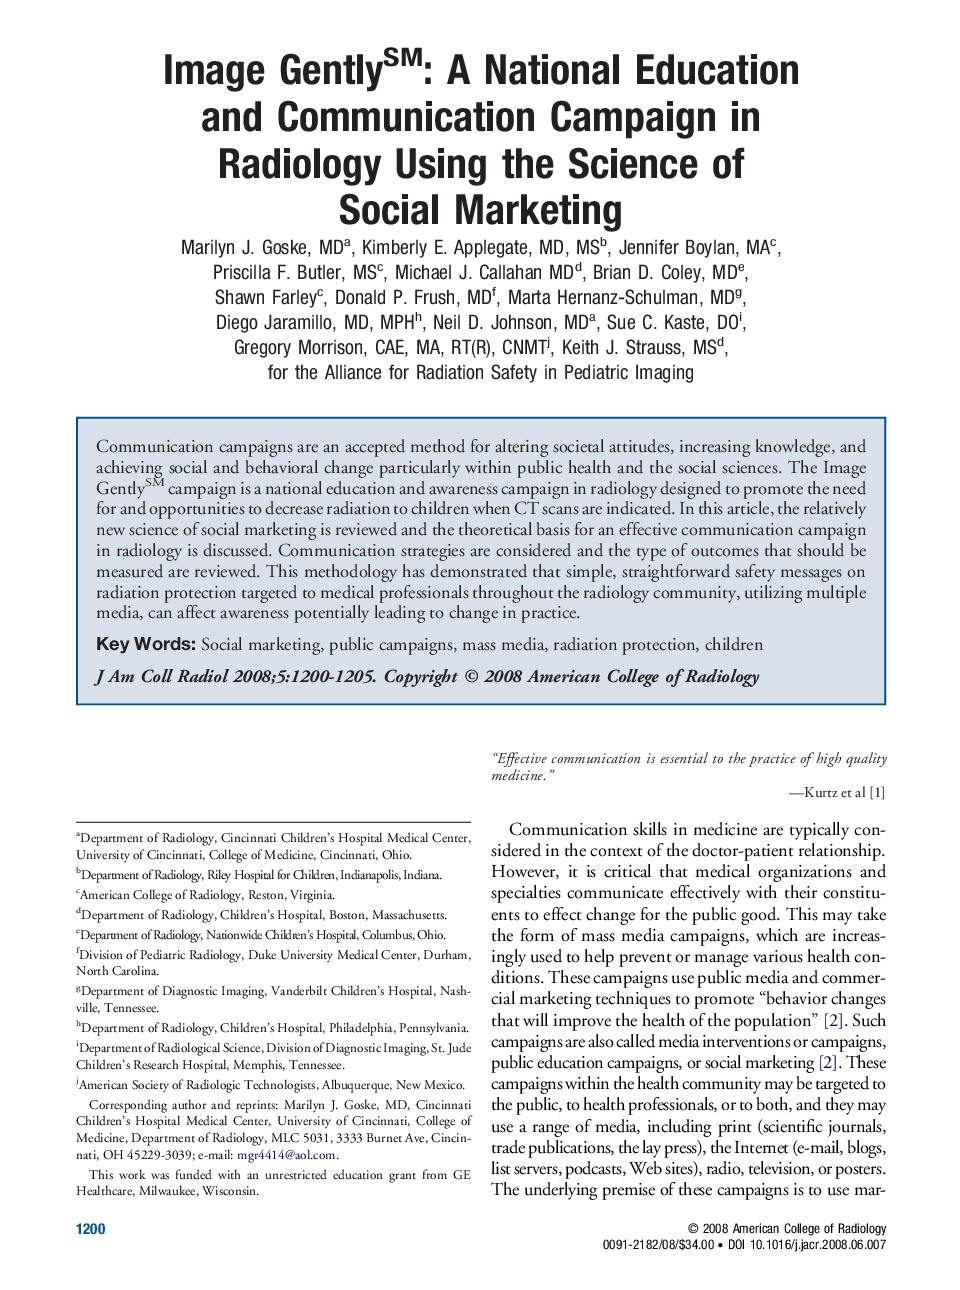 Image GentlySM: A National Education and Communication Campaign in Radiology Using the Science of Social Marketing